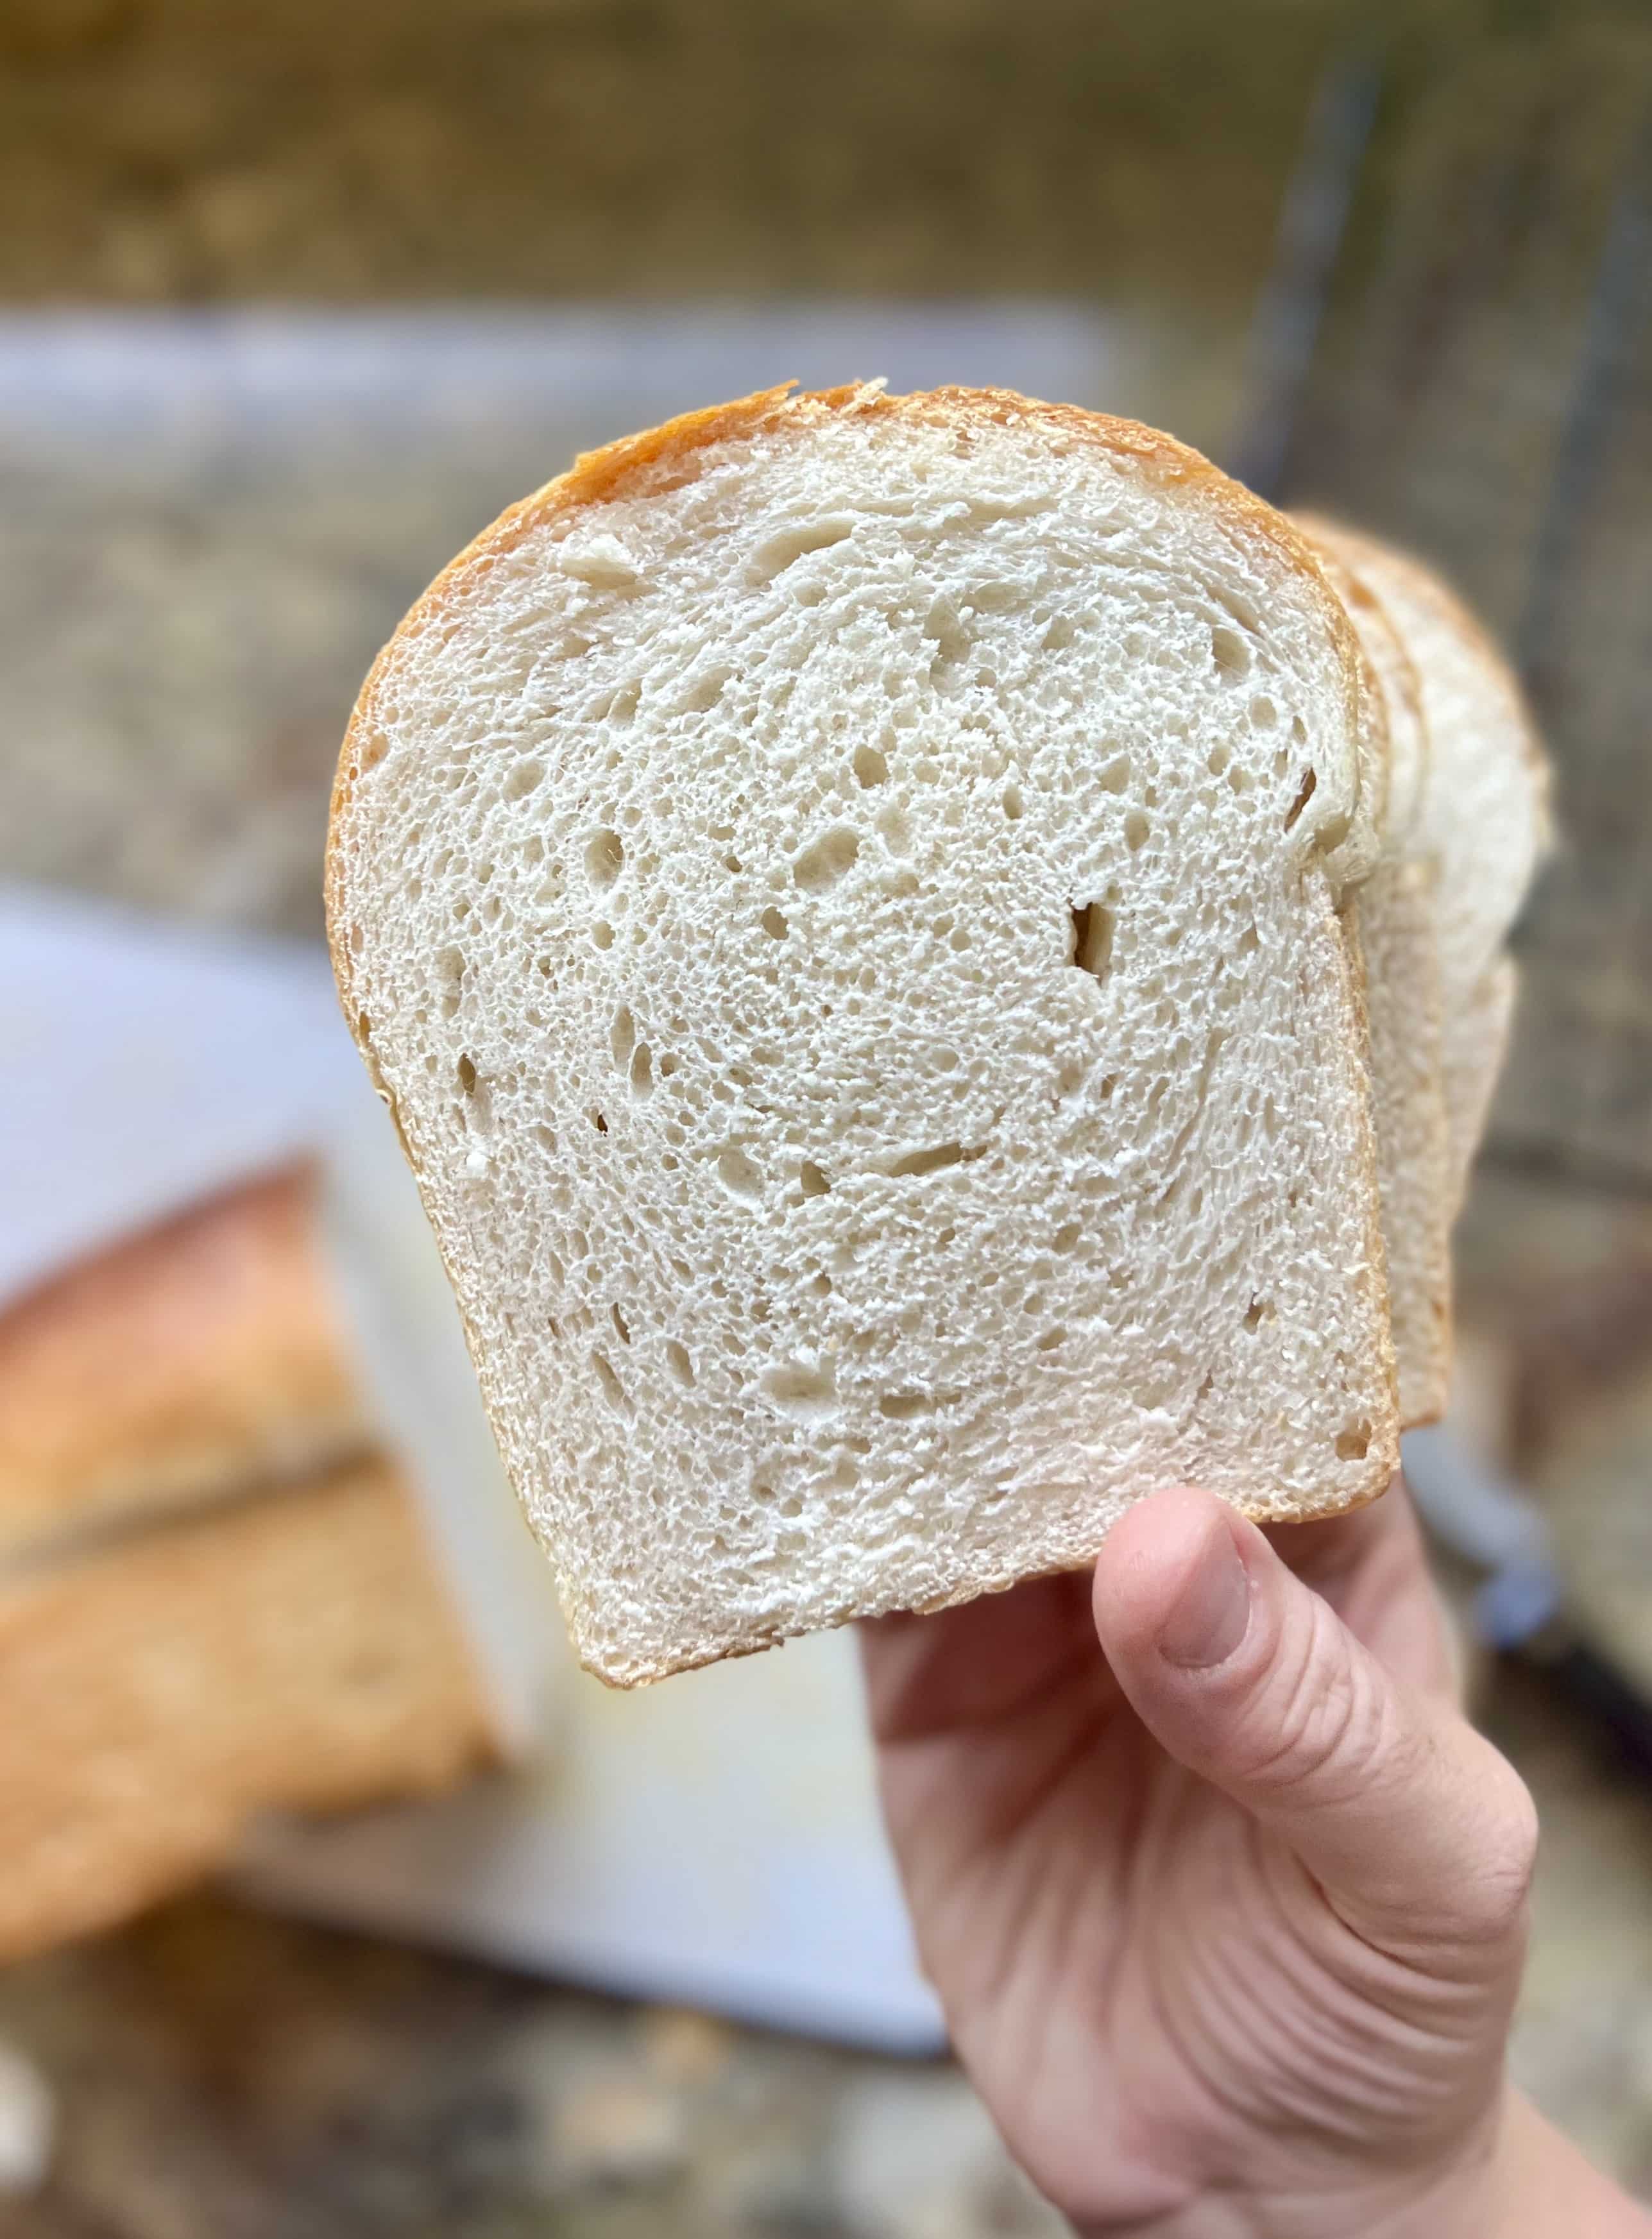 Light and Fluffy White Sandwich Bread